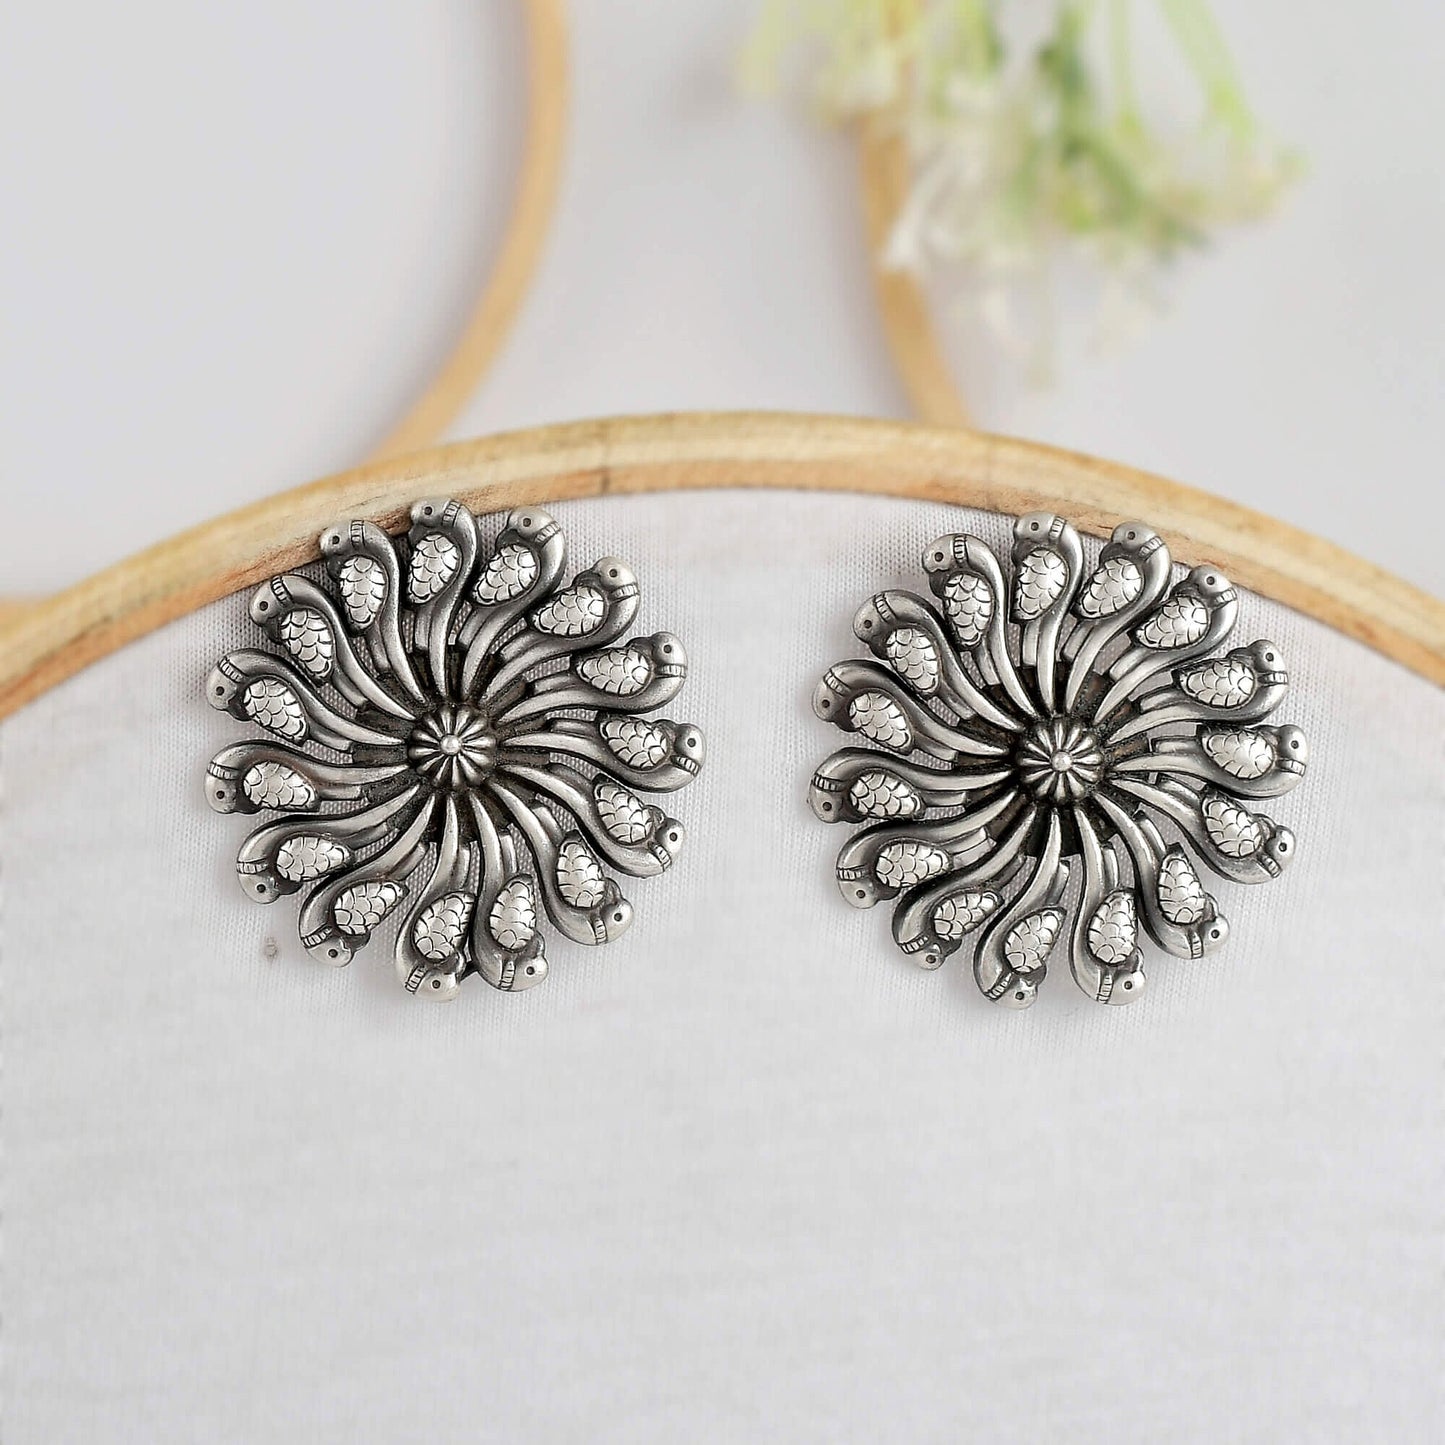 Tribal Earrings Silver Round Studs 2